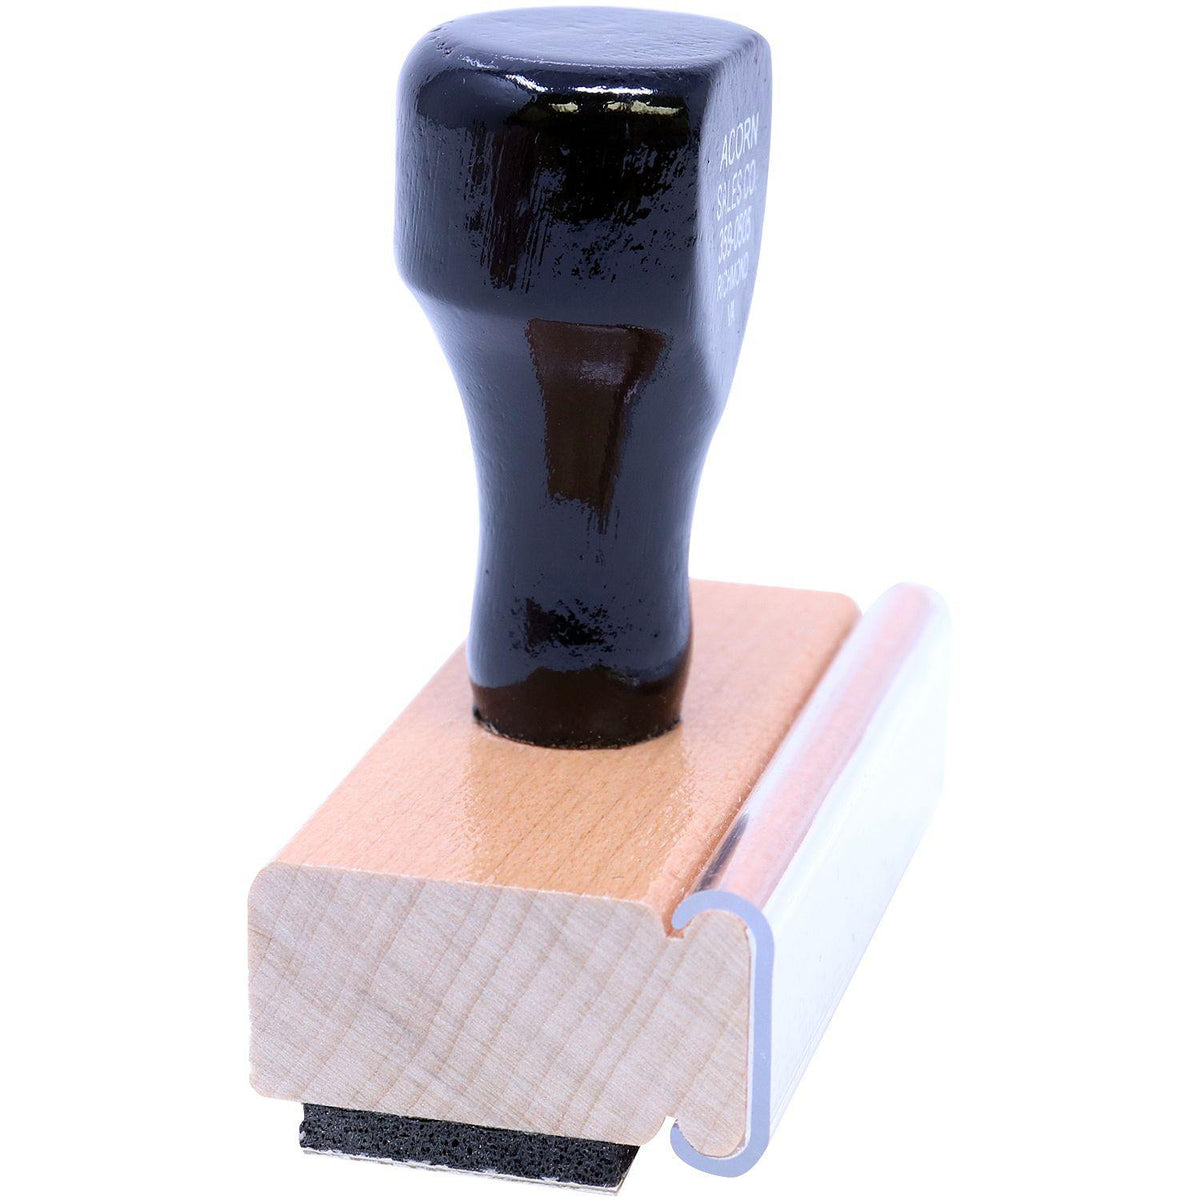 Side View of Large Hold Notice Rubber Stamp at an Angle